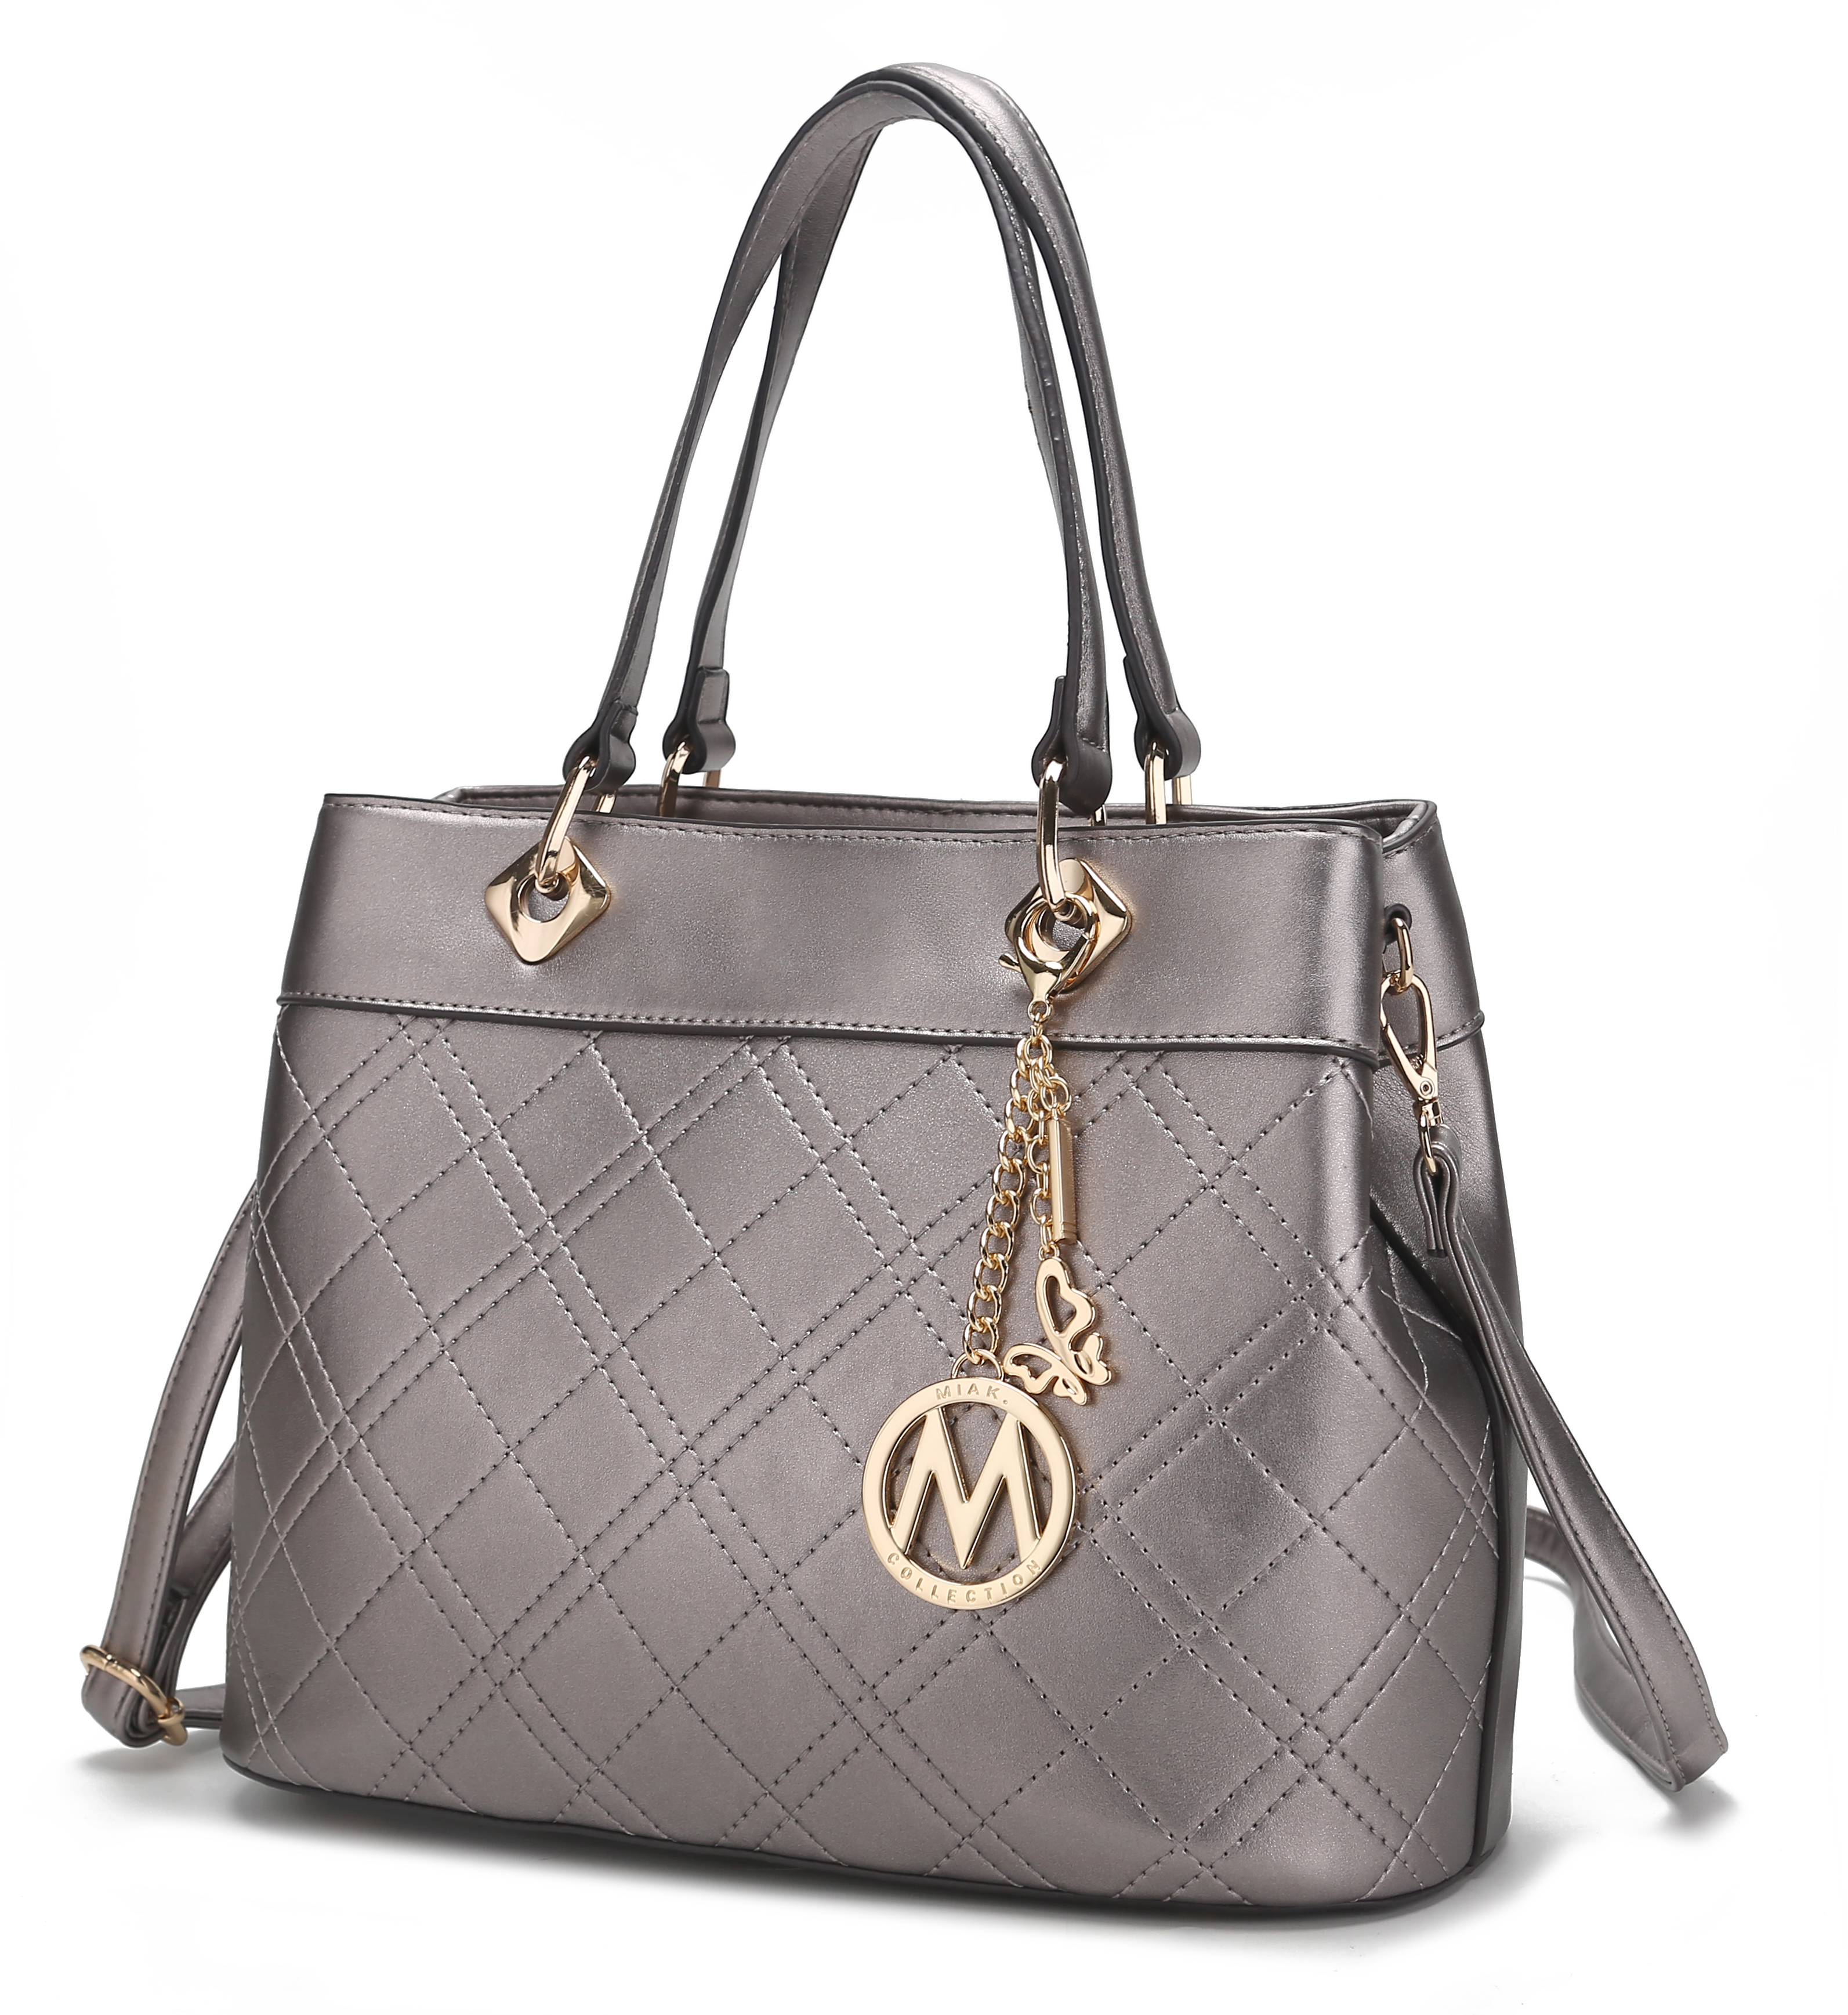 MKF Collection by Mia K. Fantasia Satchel Bag - image 1 of 5